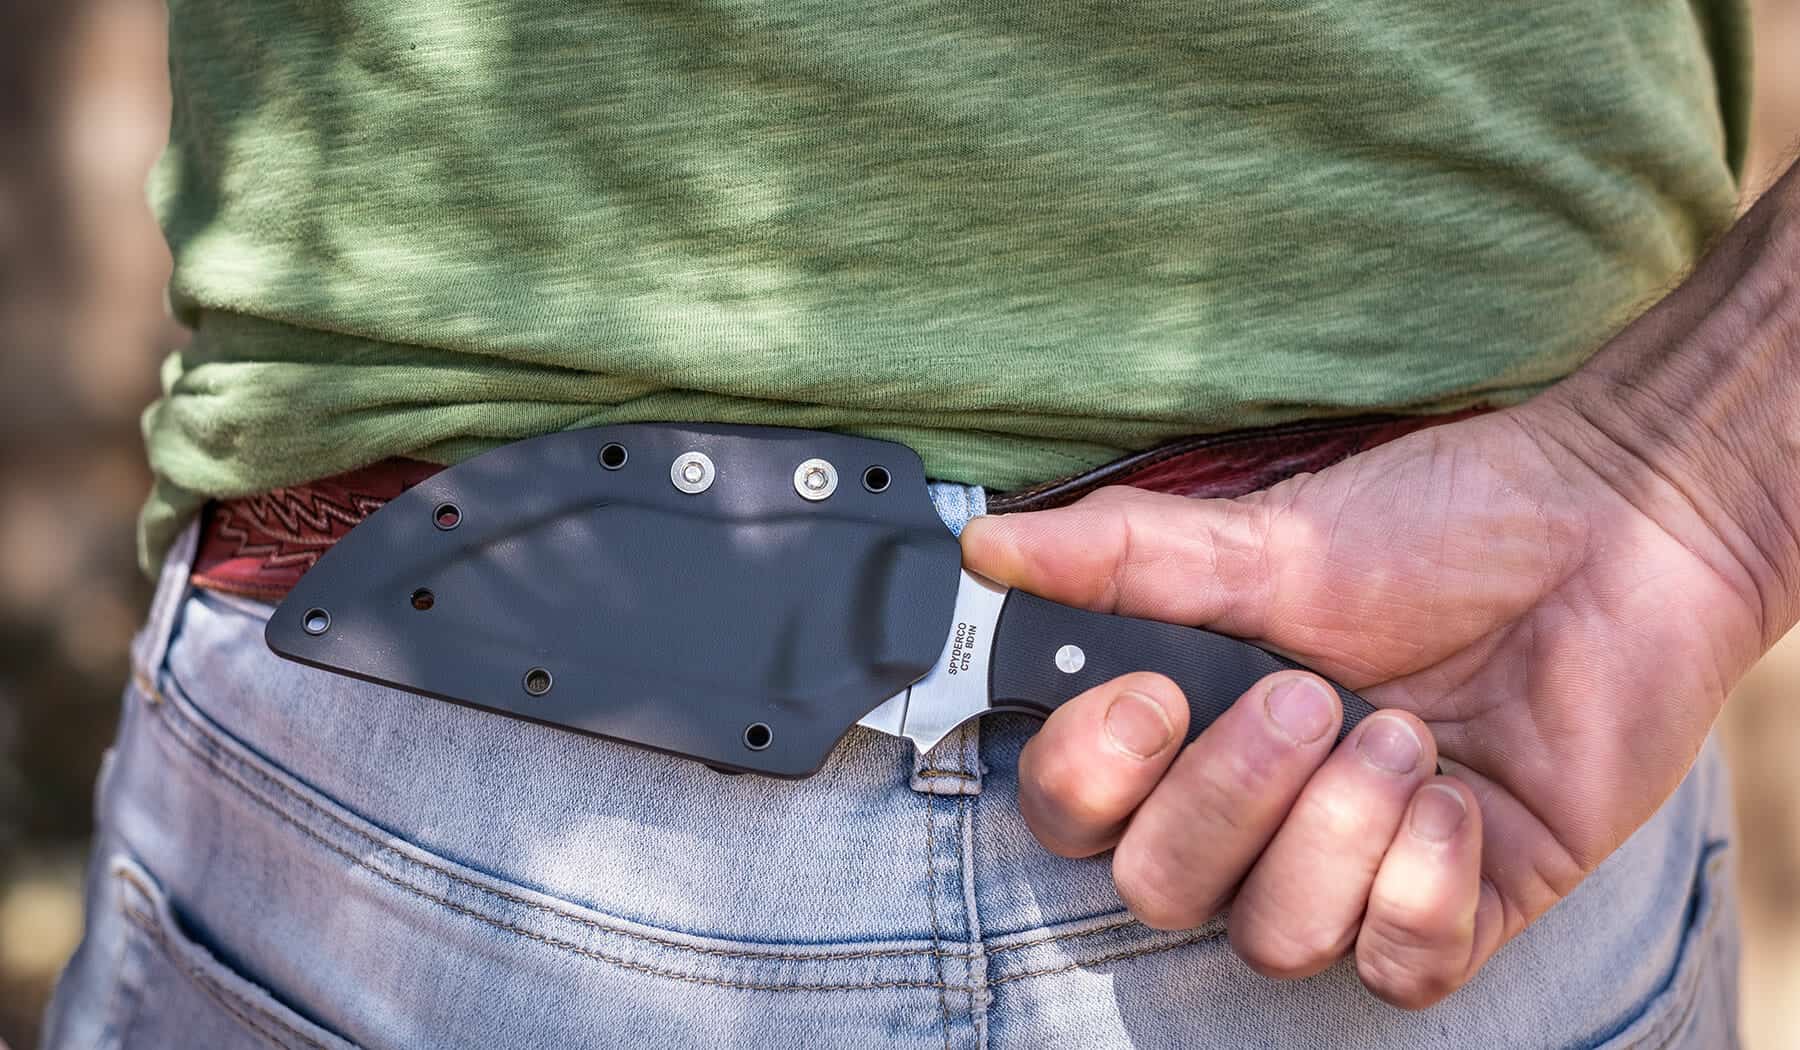 The Ronin's belt clip makes it easy to move the knife from fronthorizontal carry to scout carry pictured here..